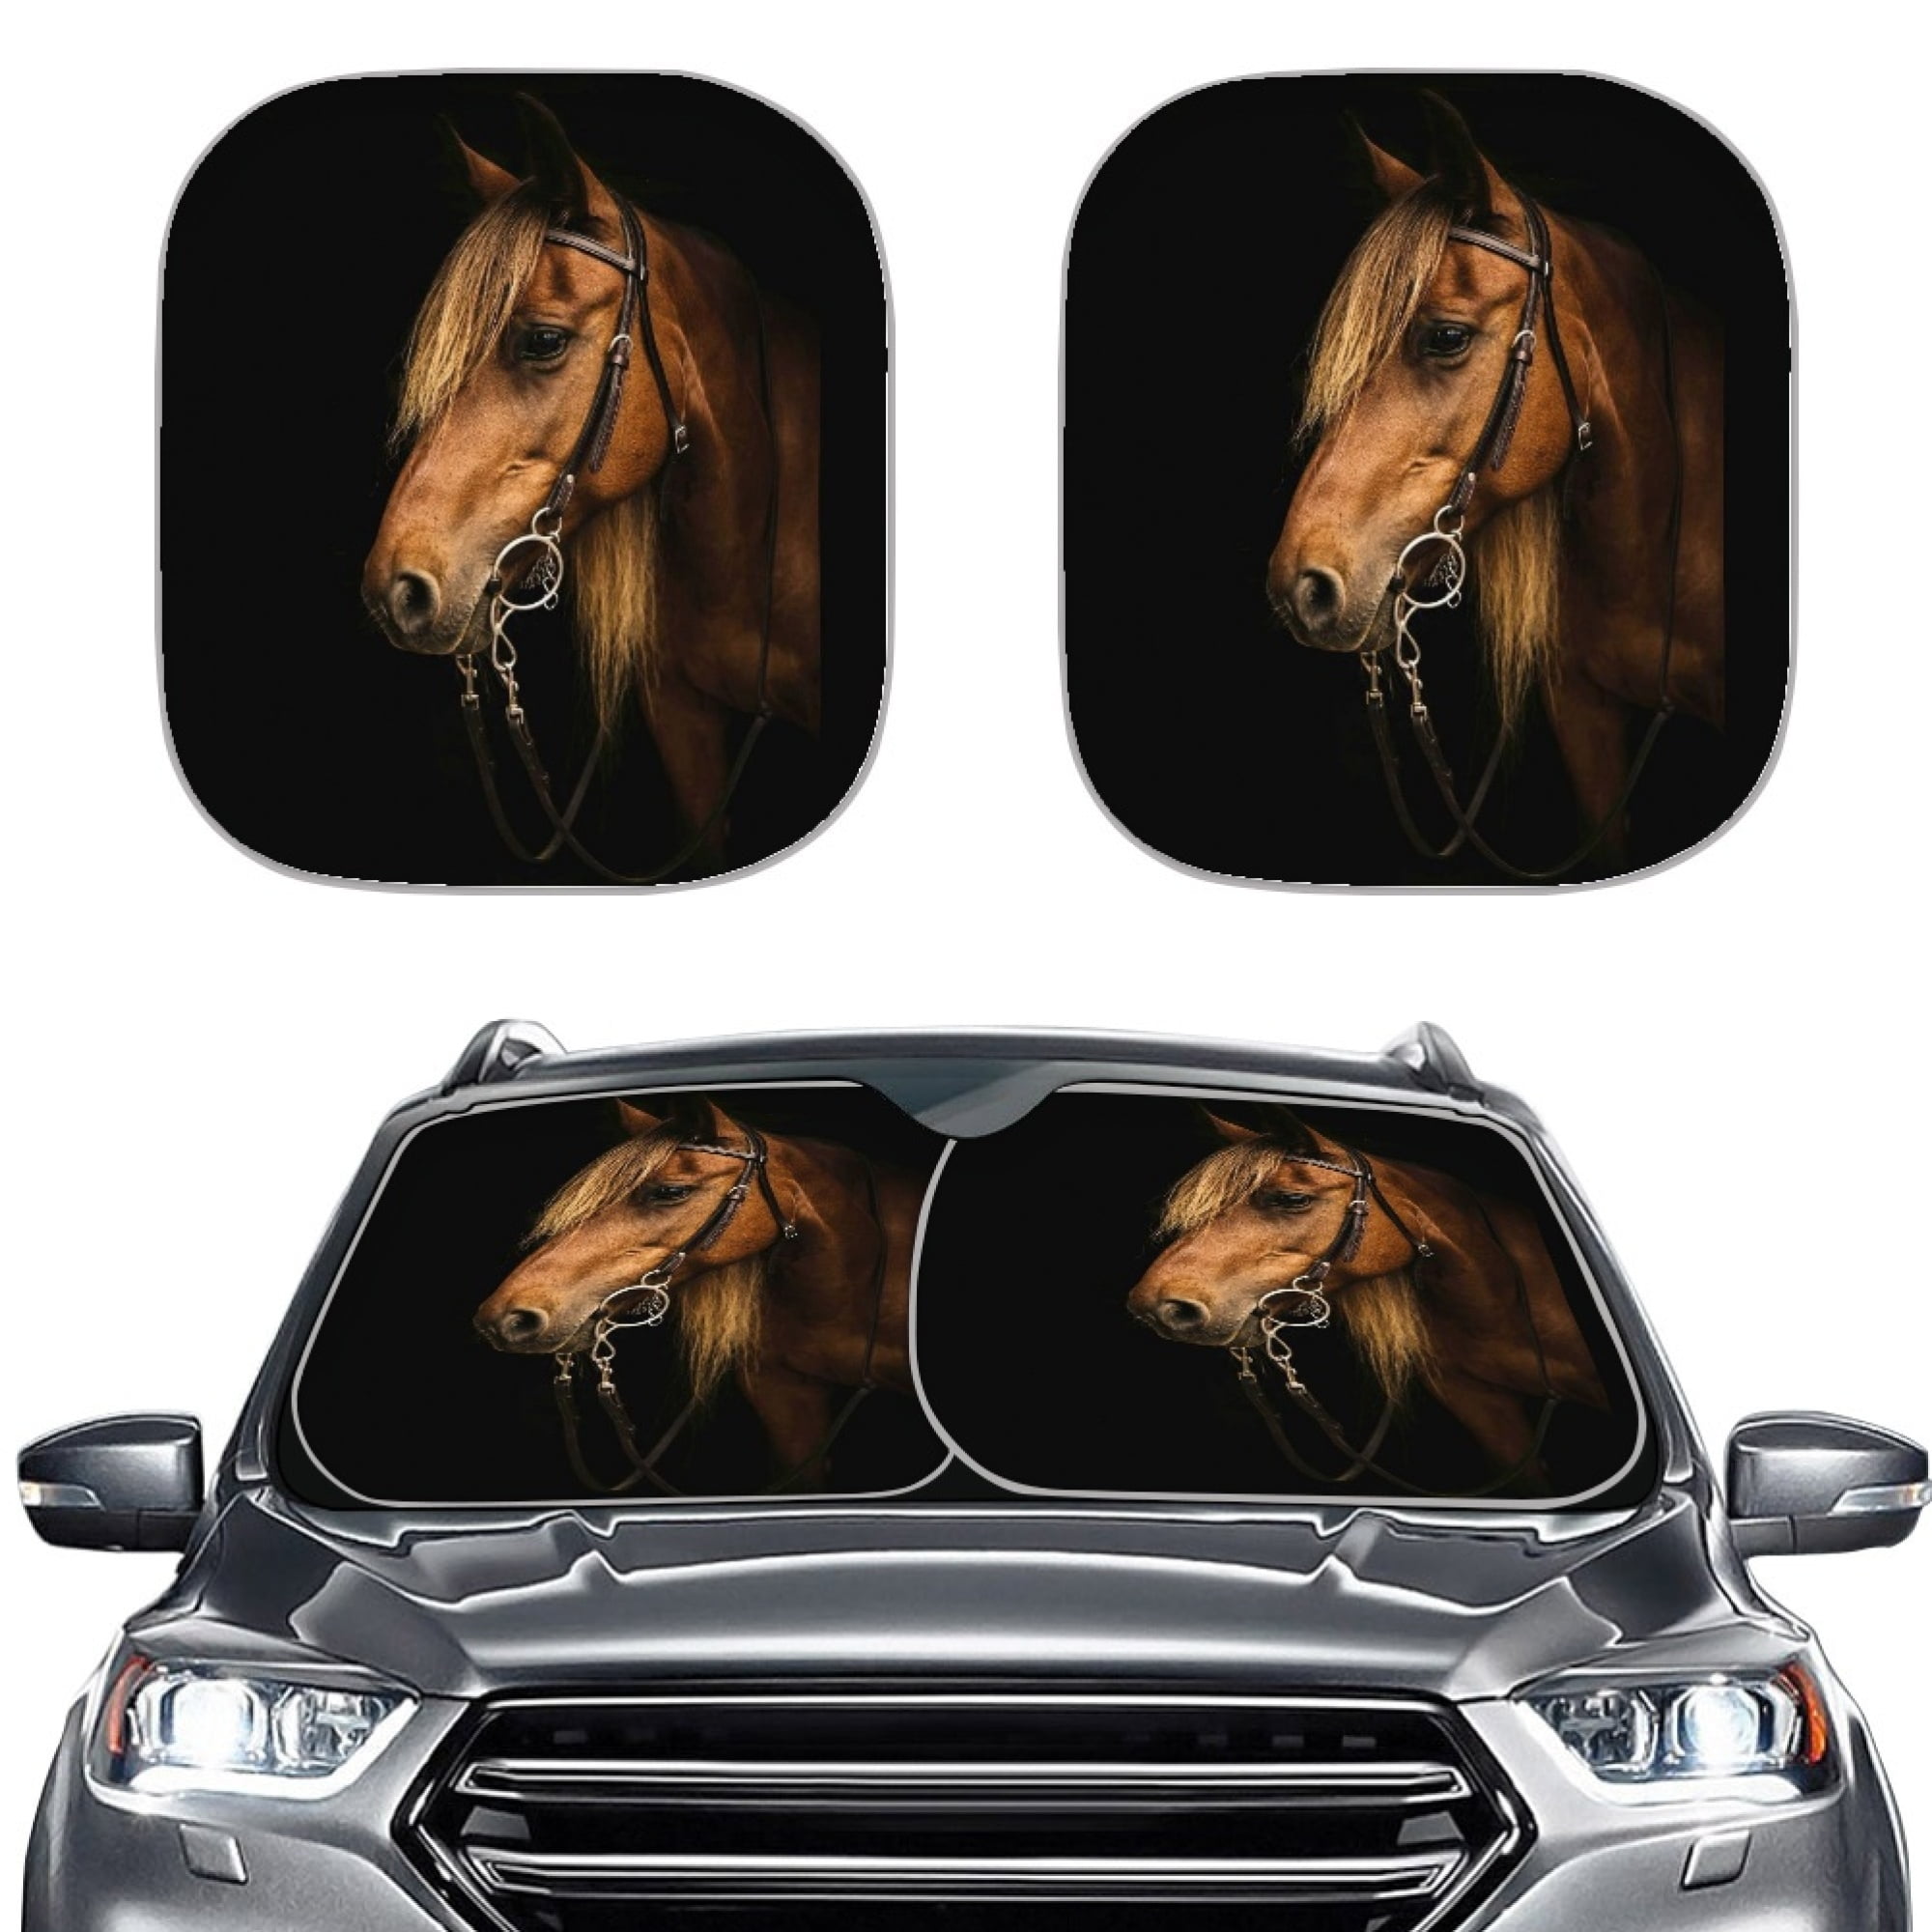 Diaonm Black Horse Car Windshield Sun Shade, Colorful Car Front Window  Cover for Car SUV Sunshade Visor Auto Vehicle Shield Reflector Blocking  Screen, Pack of 2, Black 